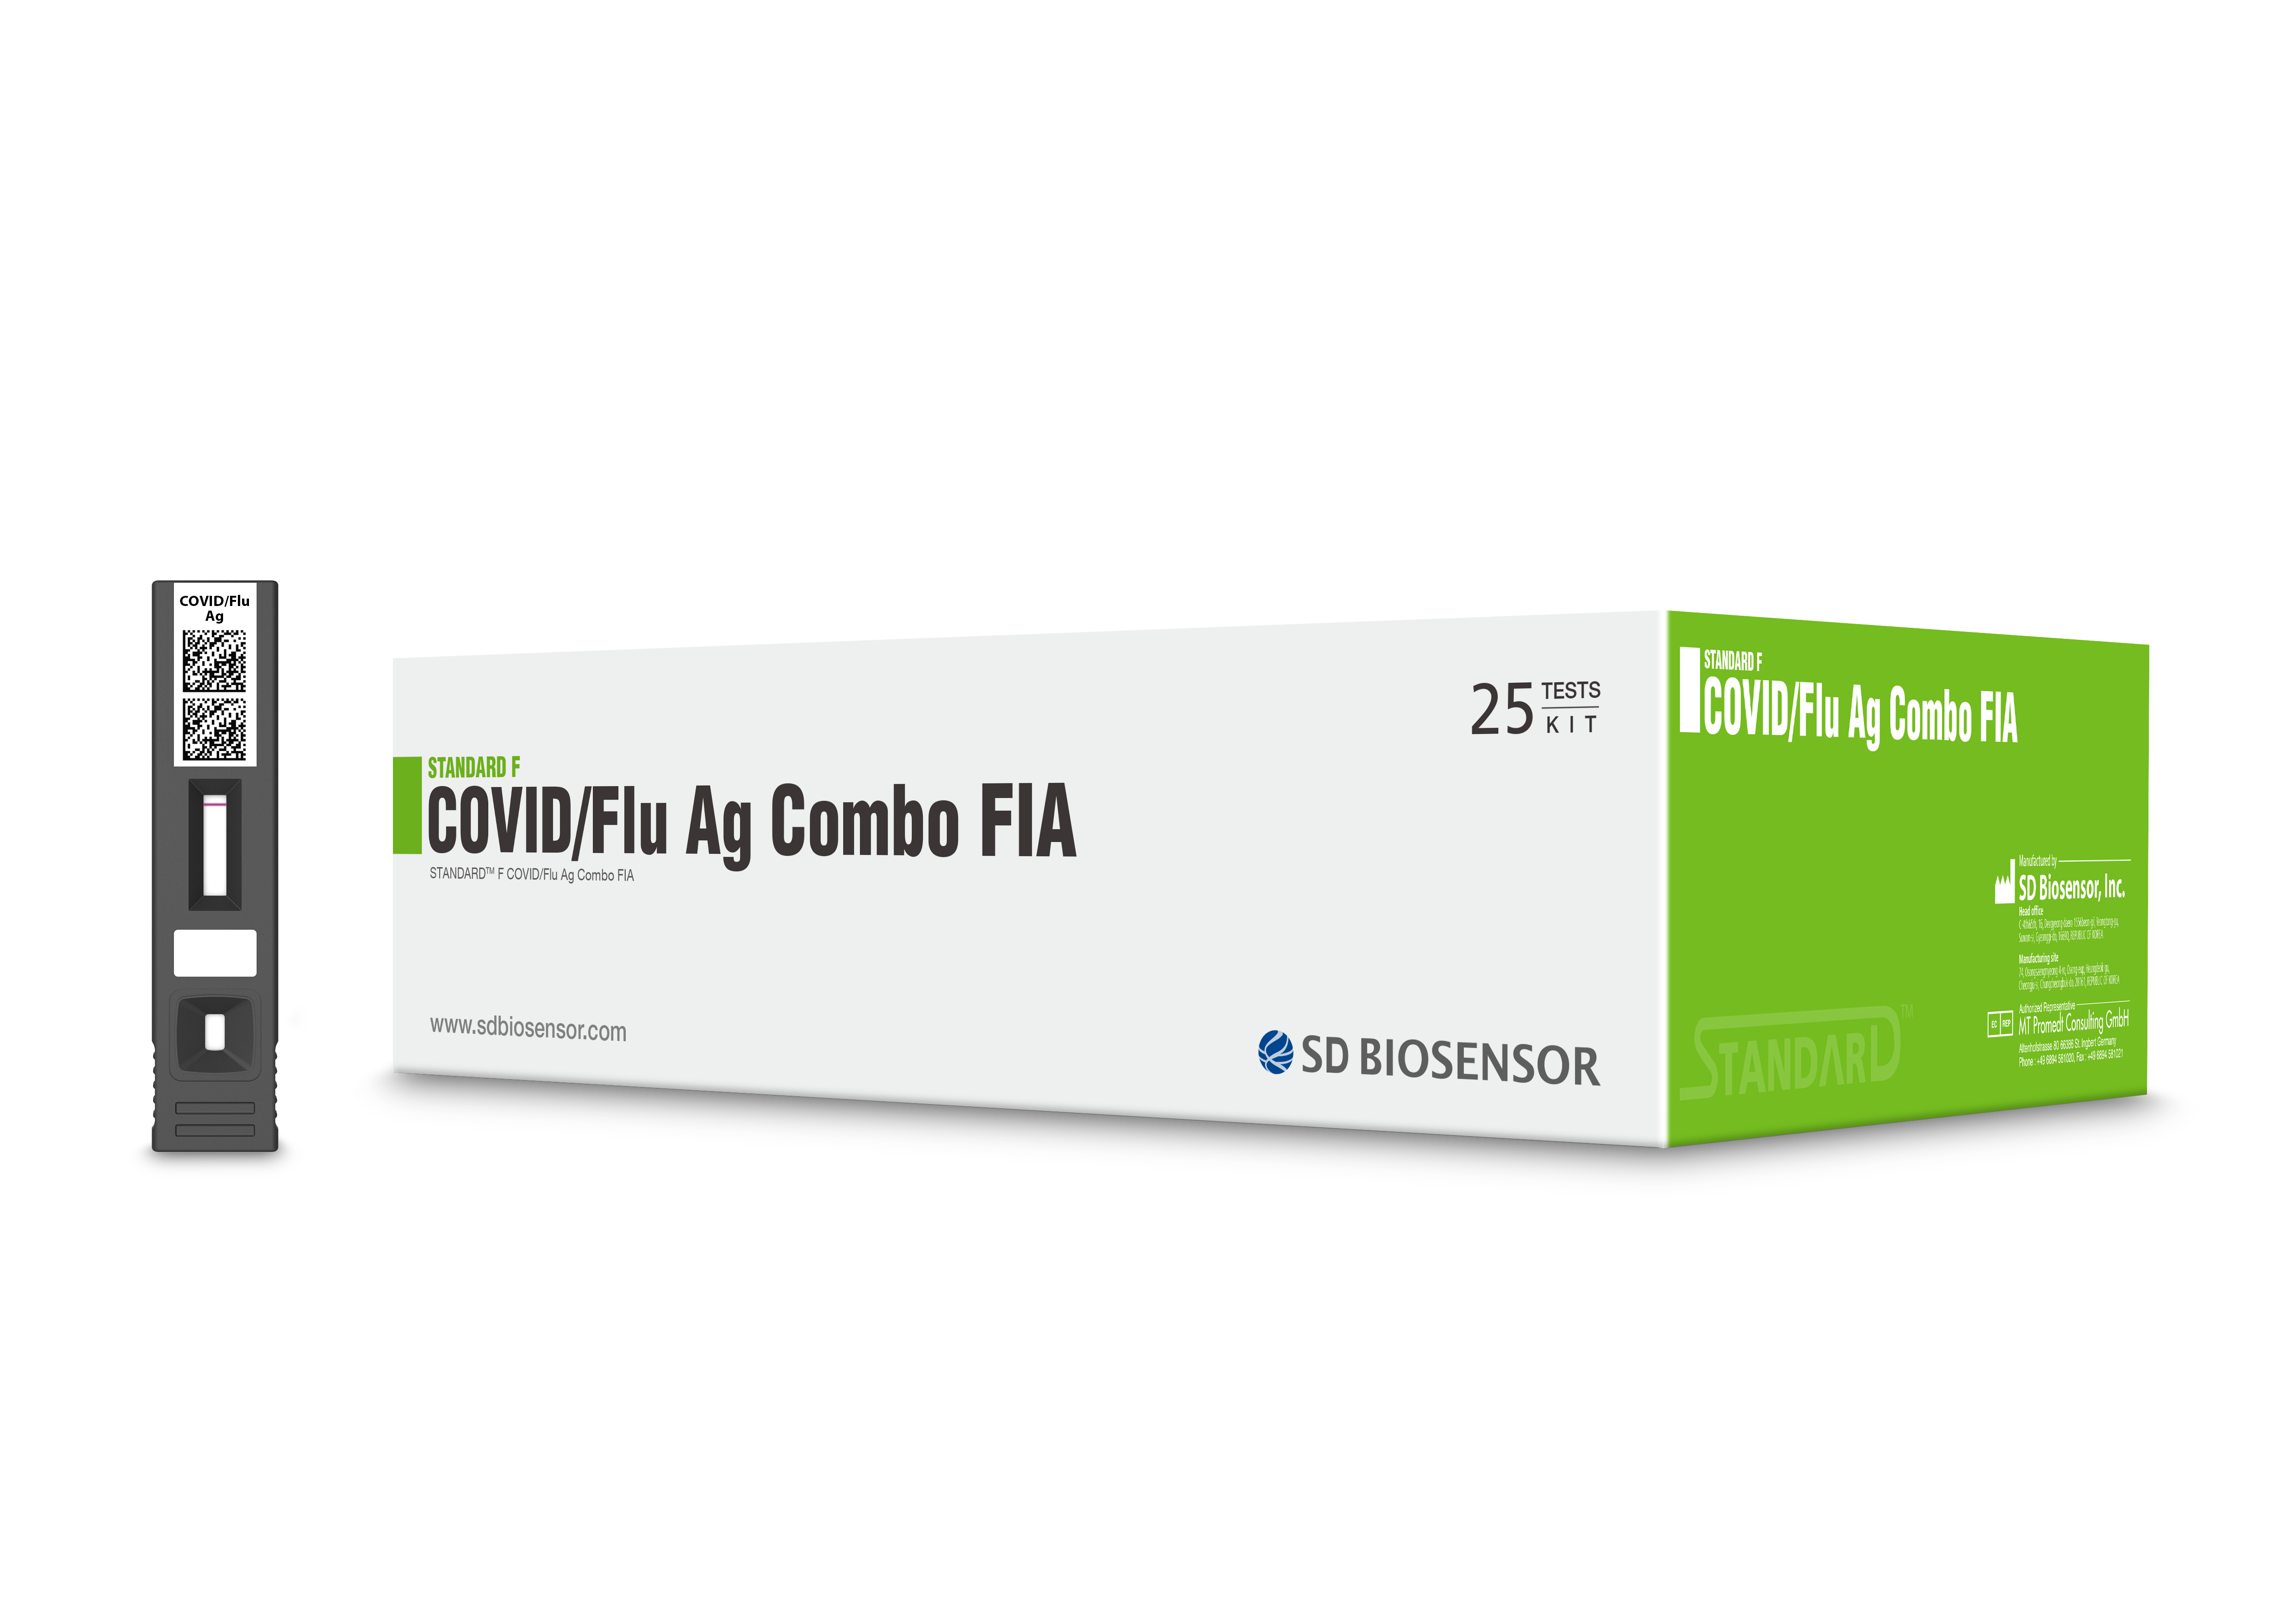 F COVID Flu Ag Combo packagedevice